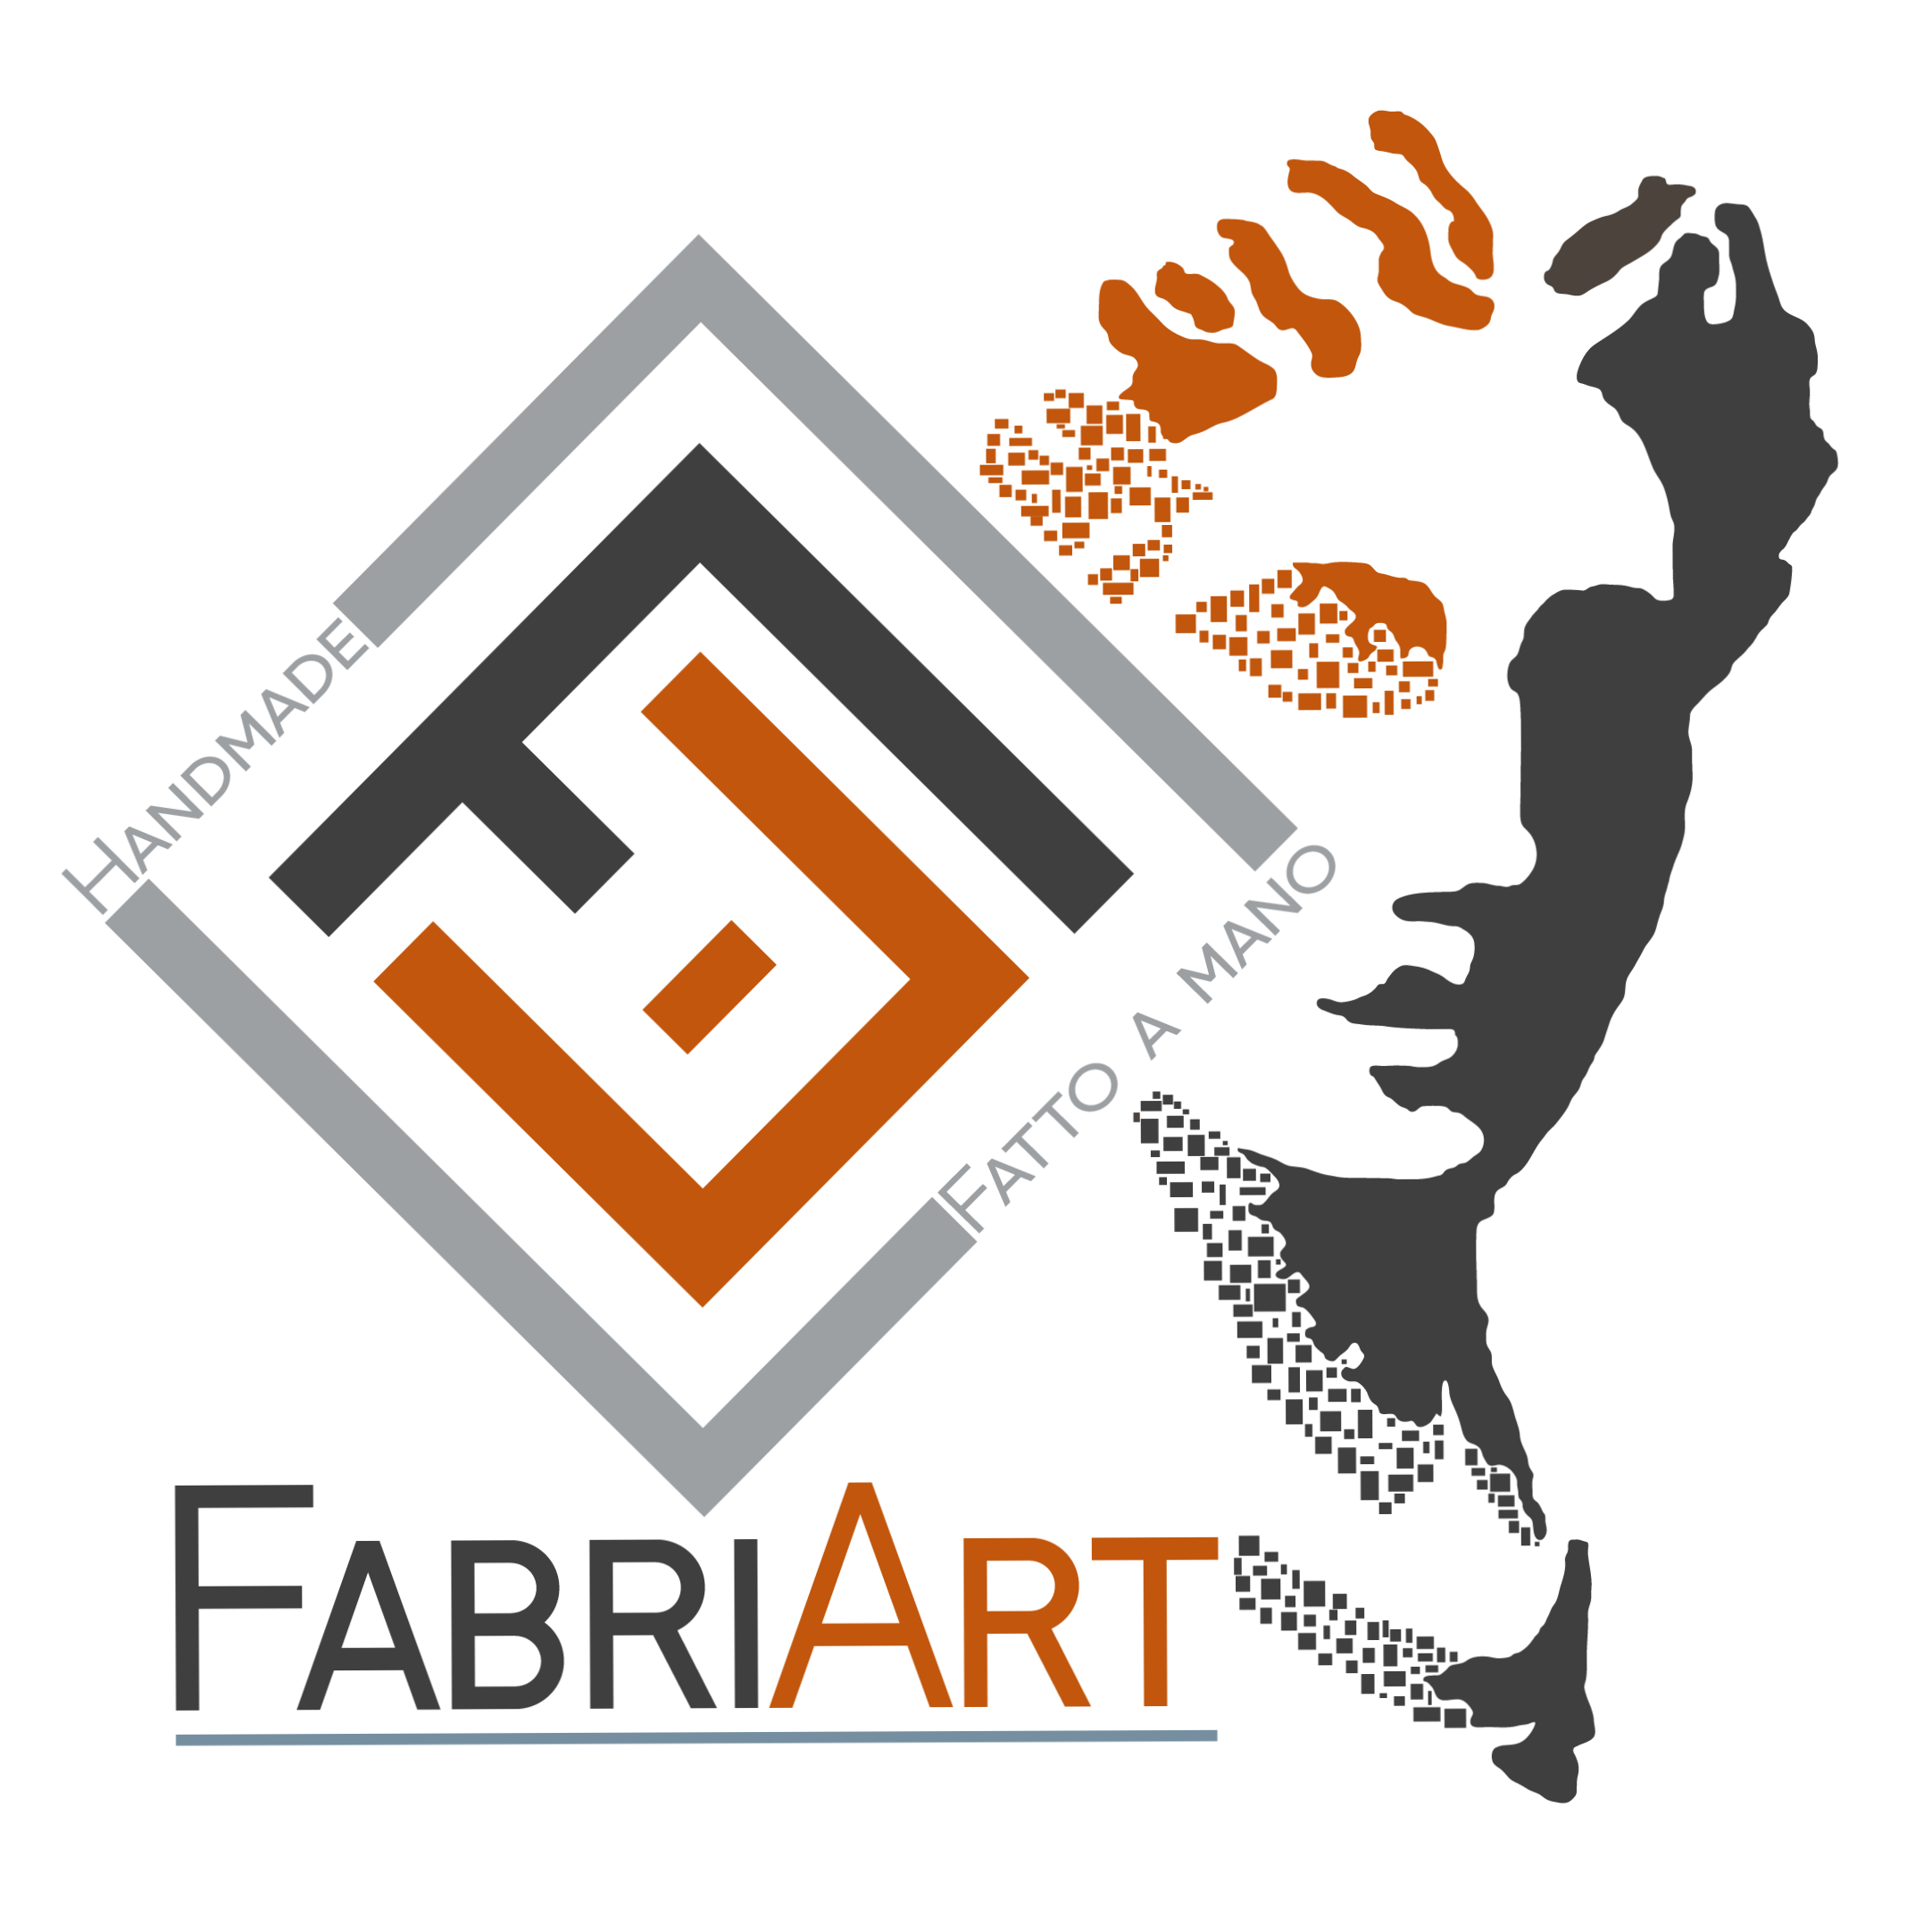 FabriArt